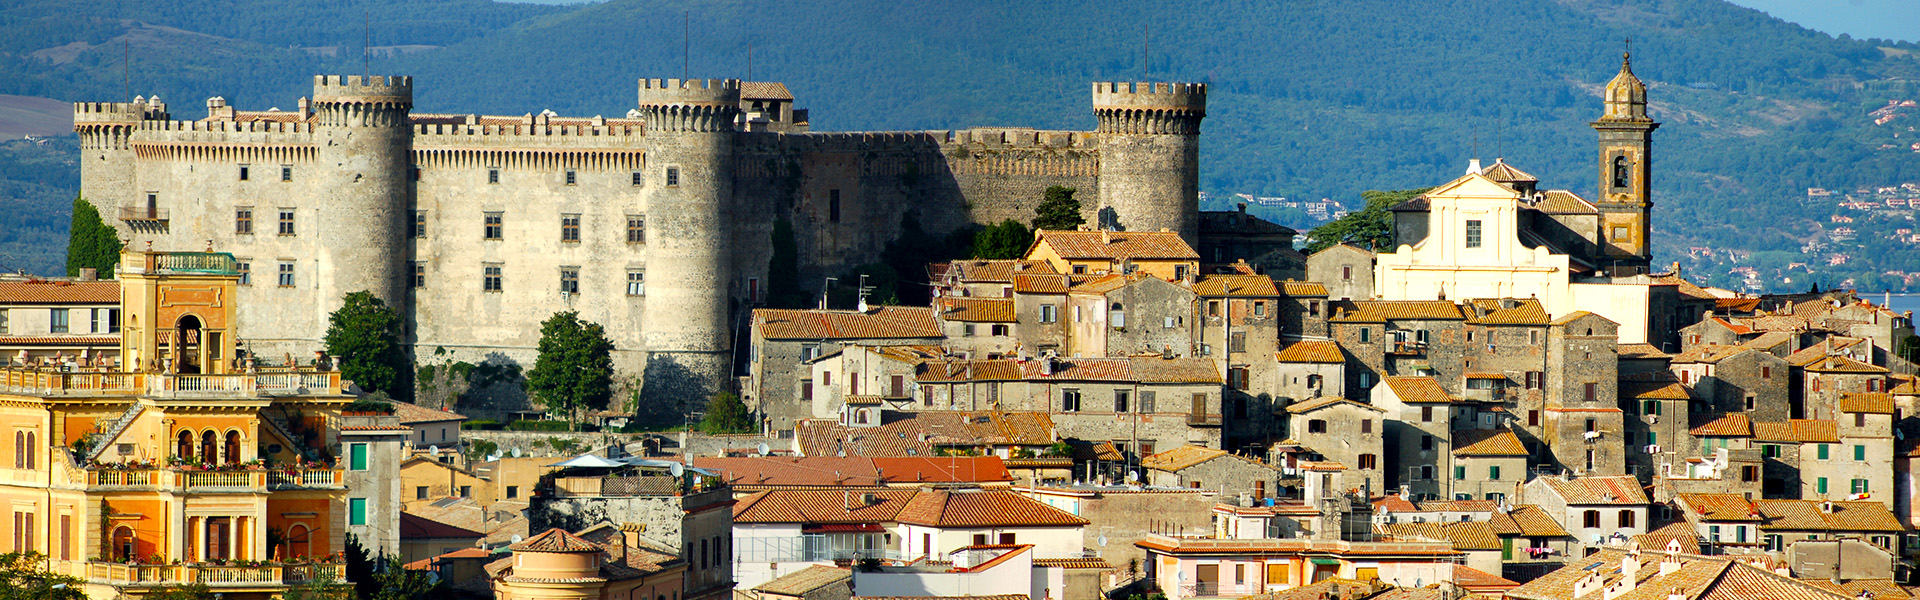 Ideas for All Saints' Long Weekend 2016: from castle to castle (picture: Odescalchi Castle in Bracciano)